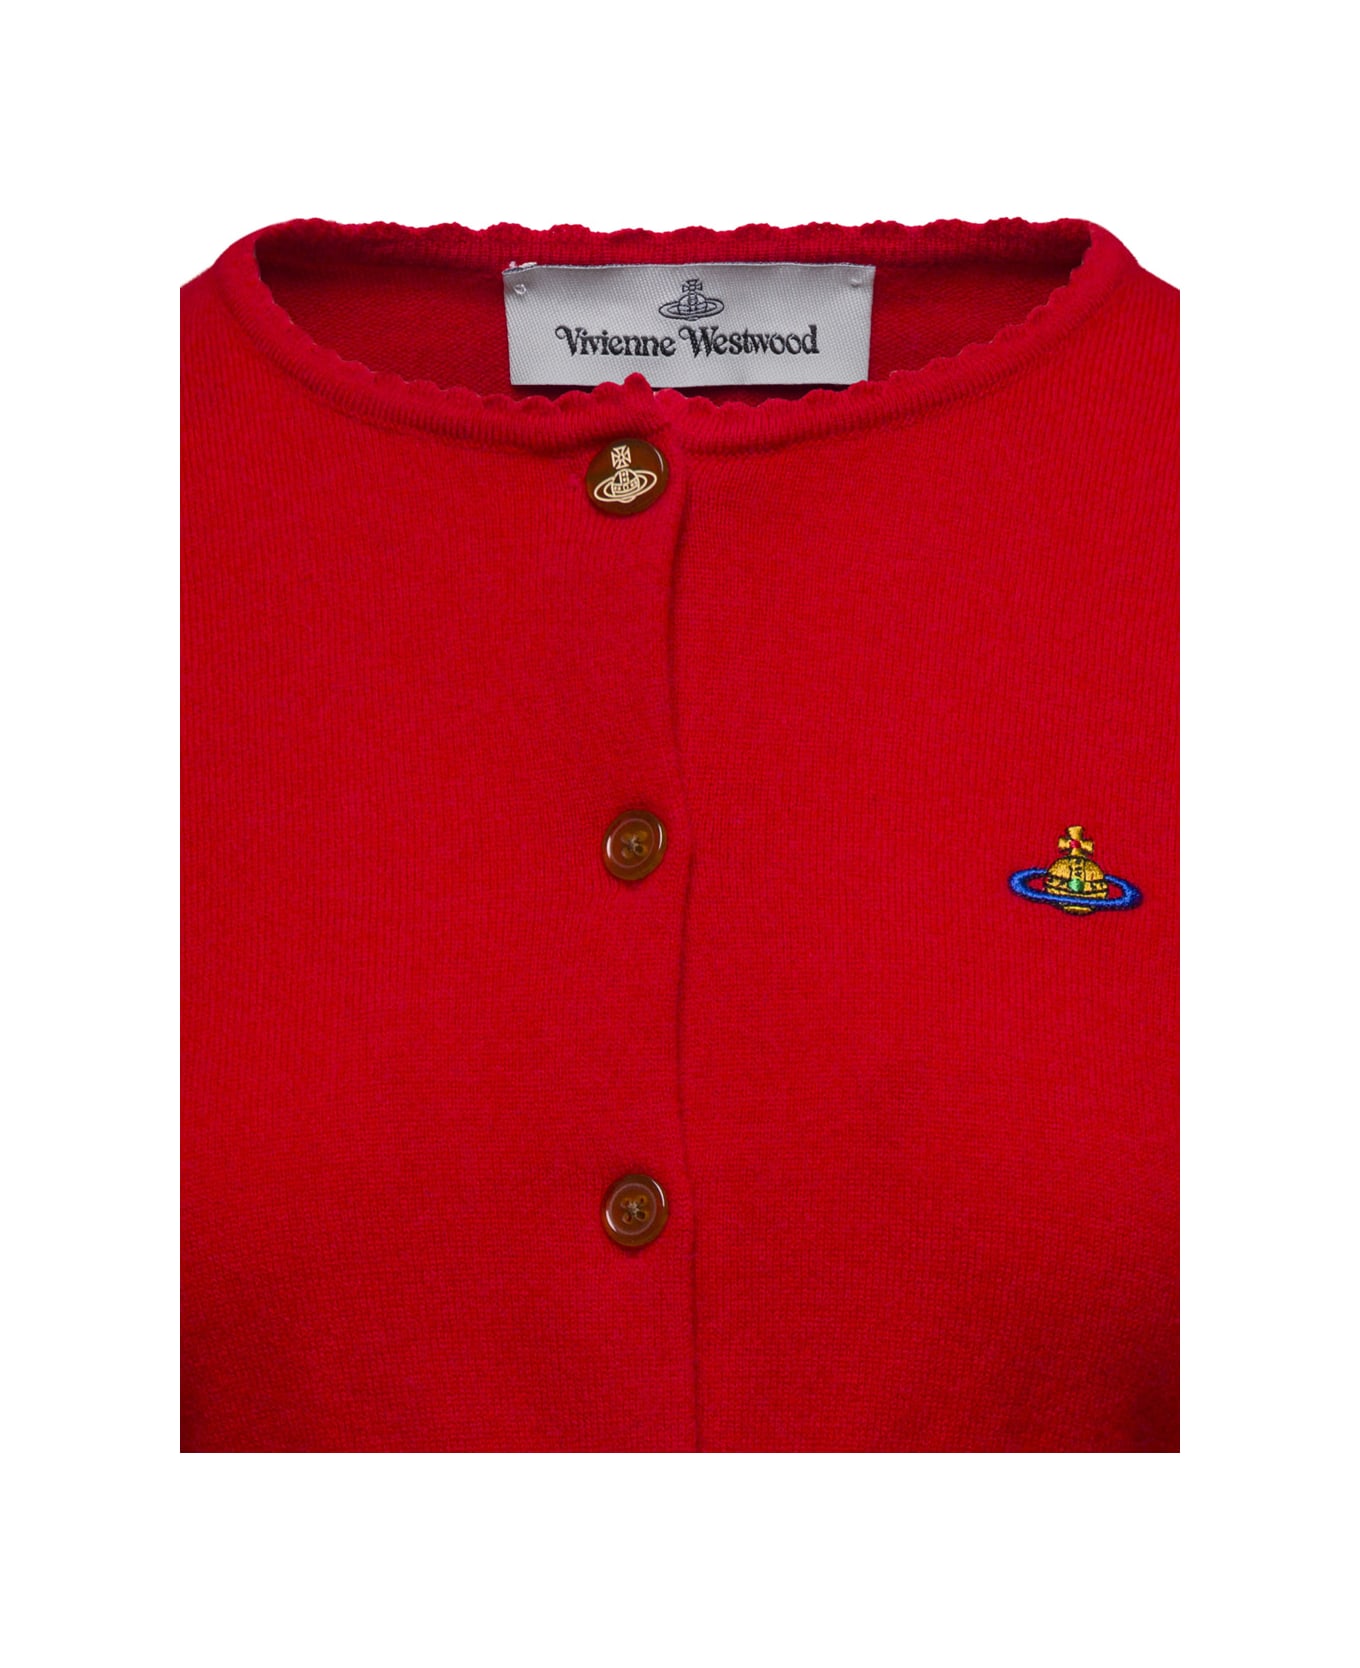 Vivienne Westwood Red Cardigan With Signature Embroidered Orb Logo In Cotton Woman - Red ニットウェア